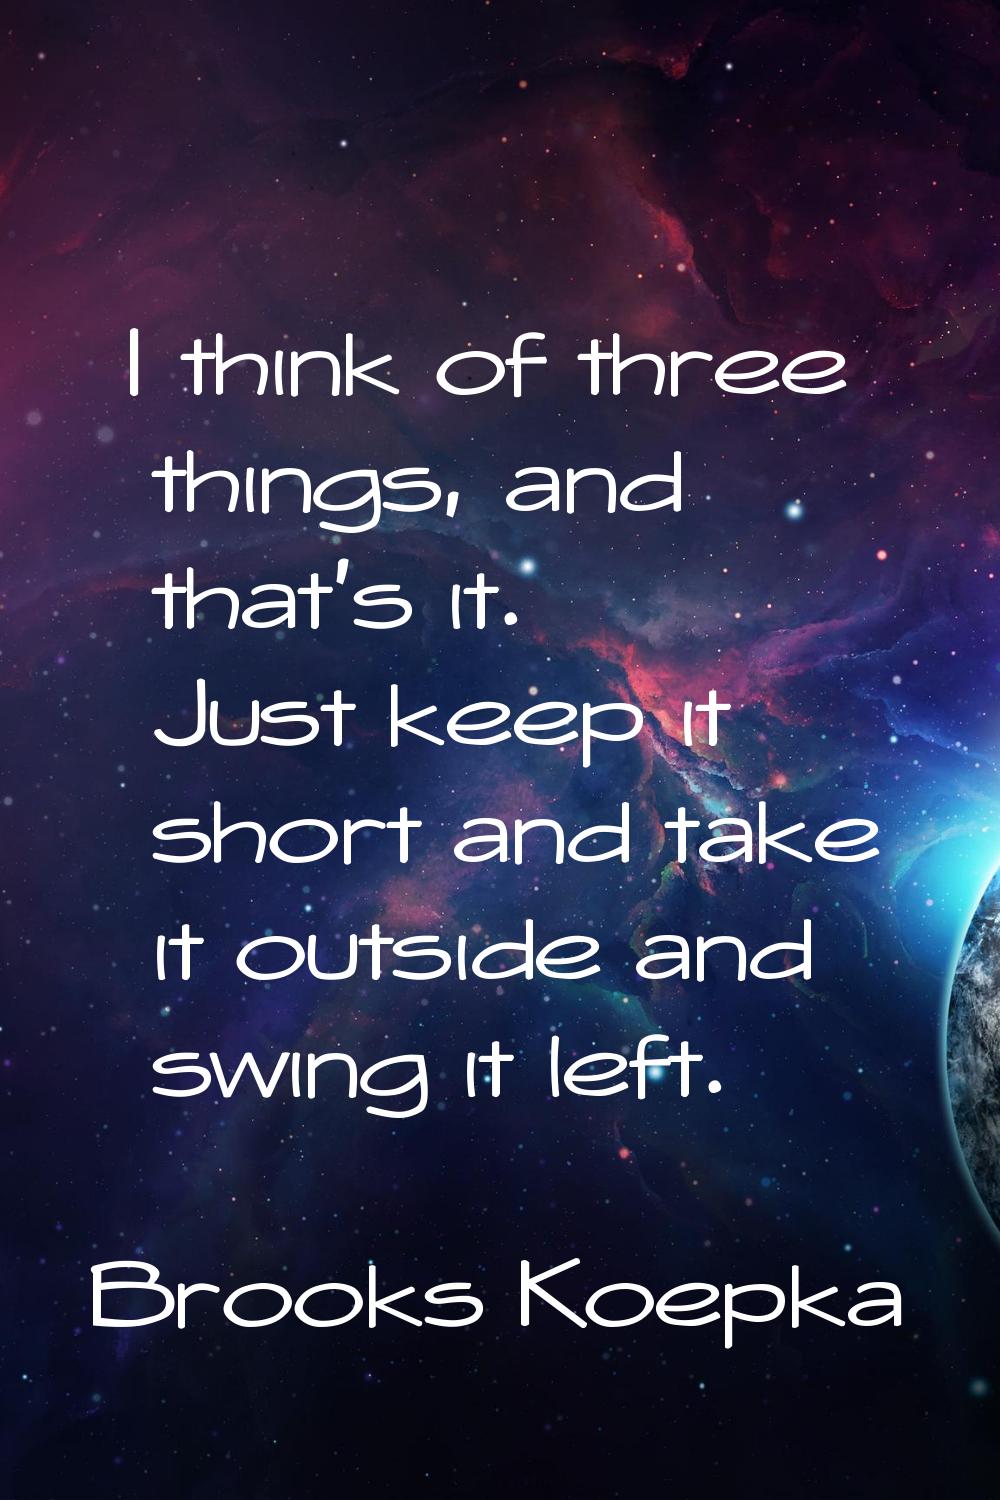 I think of three things, and that's it. Just keep it short and take it outside and swing it left.